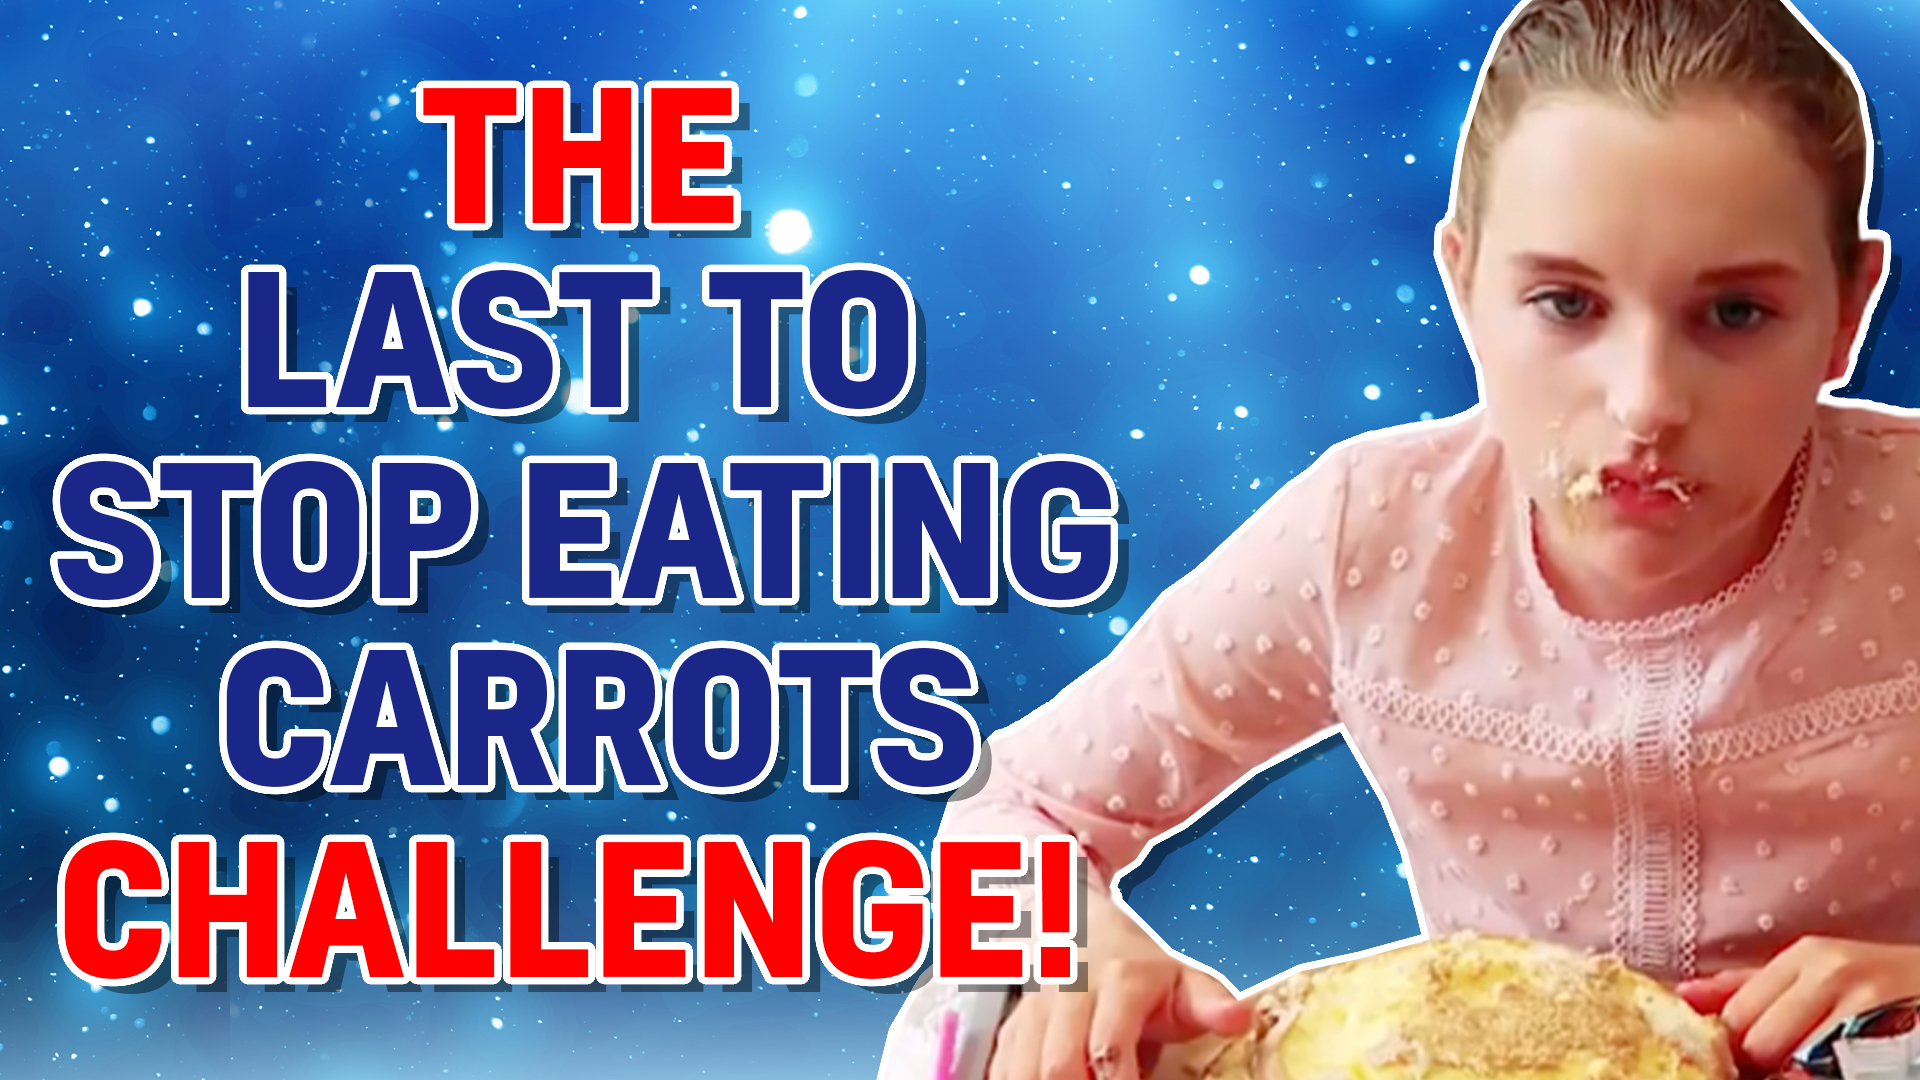 LAST TO STOP EATING CARROTS